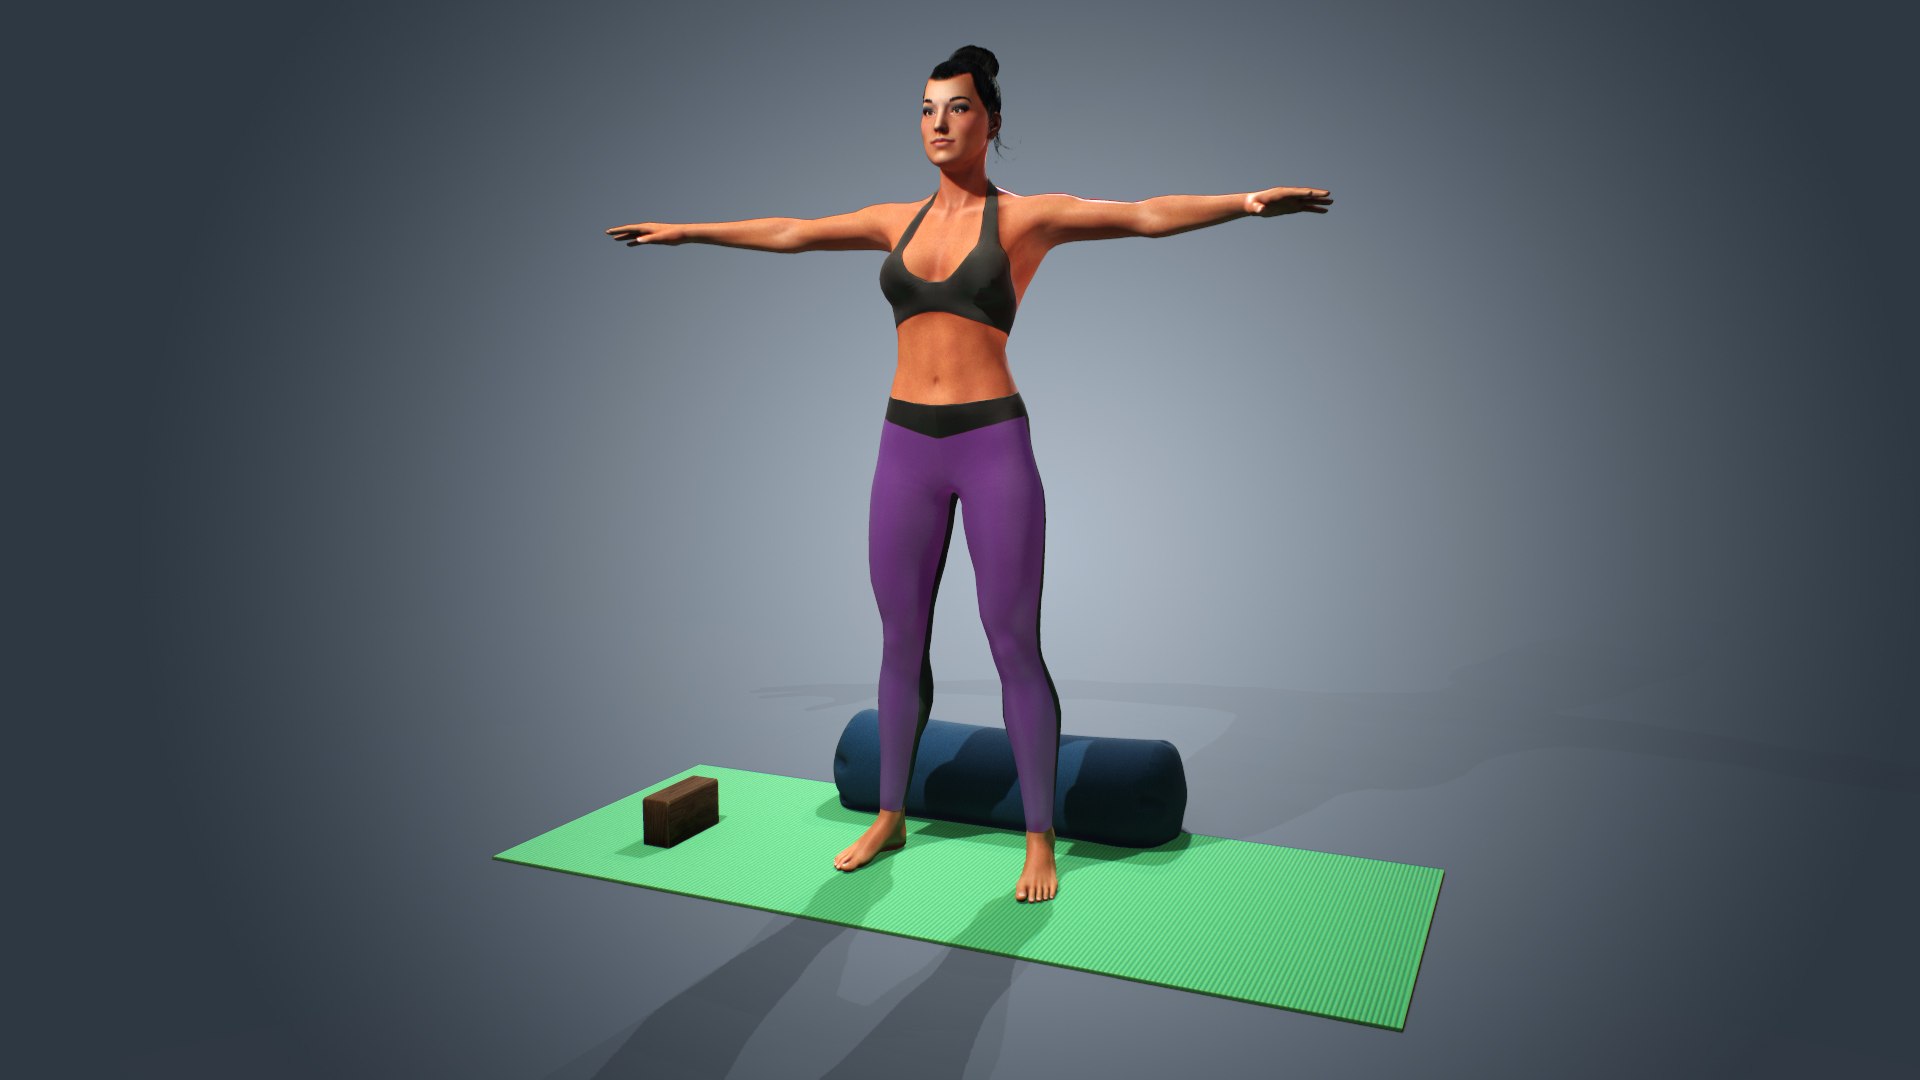 83,911 Standing Yoga Poses Images, Stock Photos, 3D objects